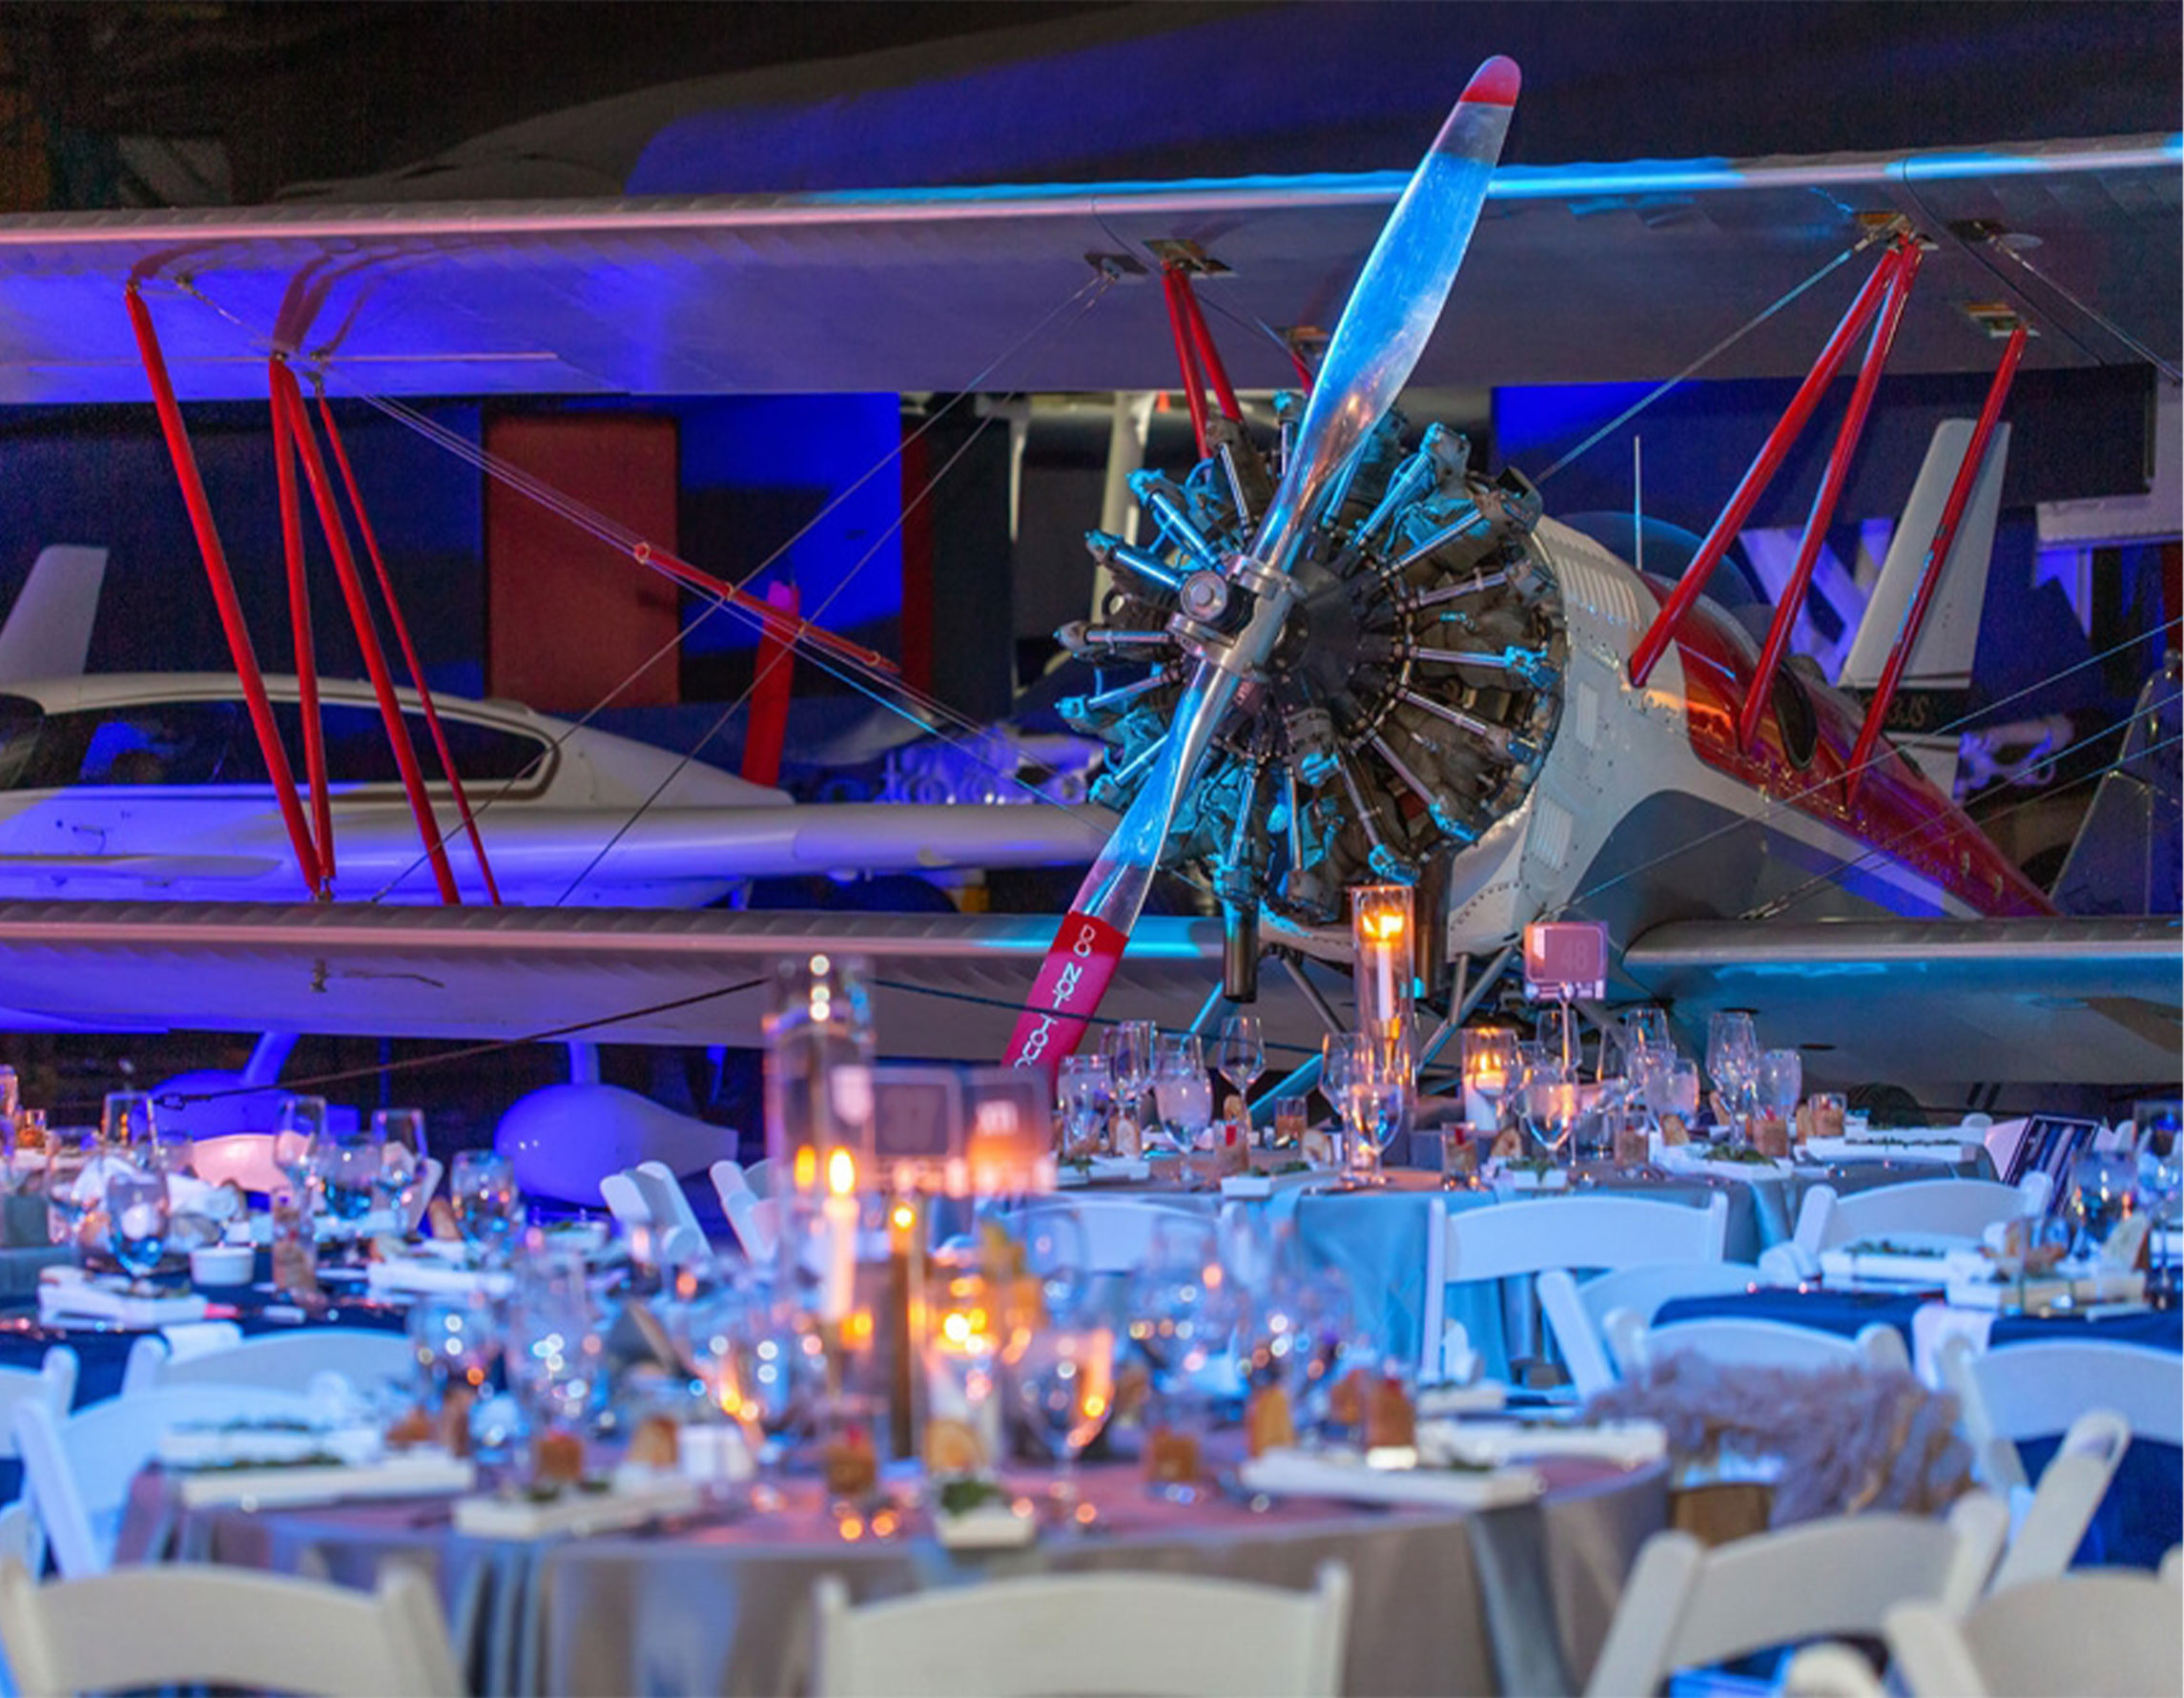 Gala event at the Air & Space Museum